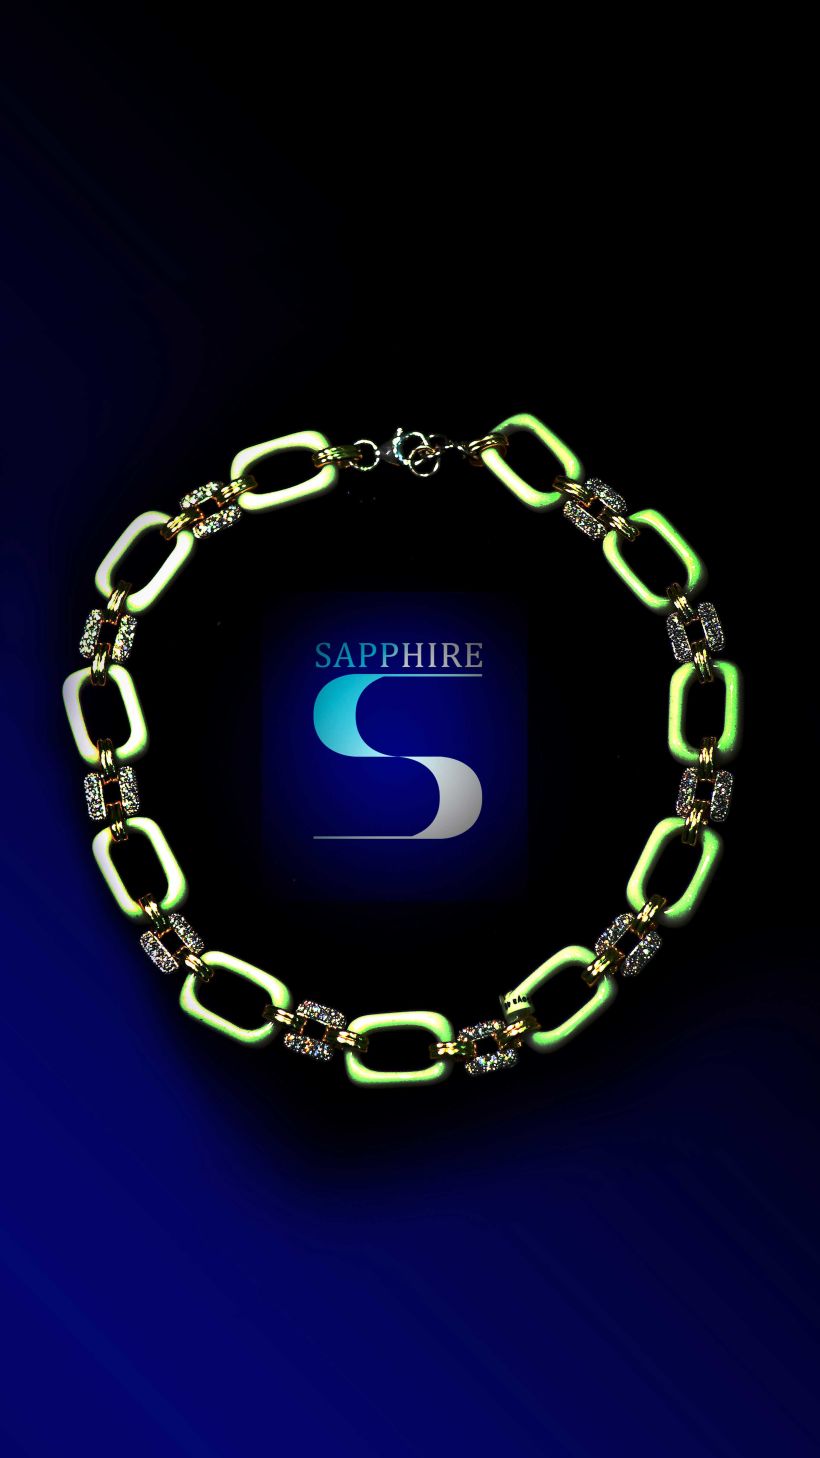 works for Sapphire 1